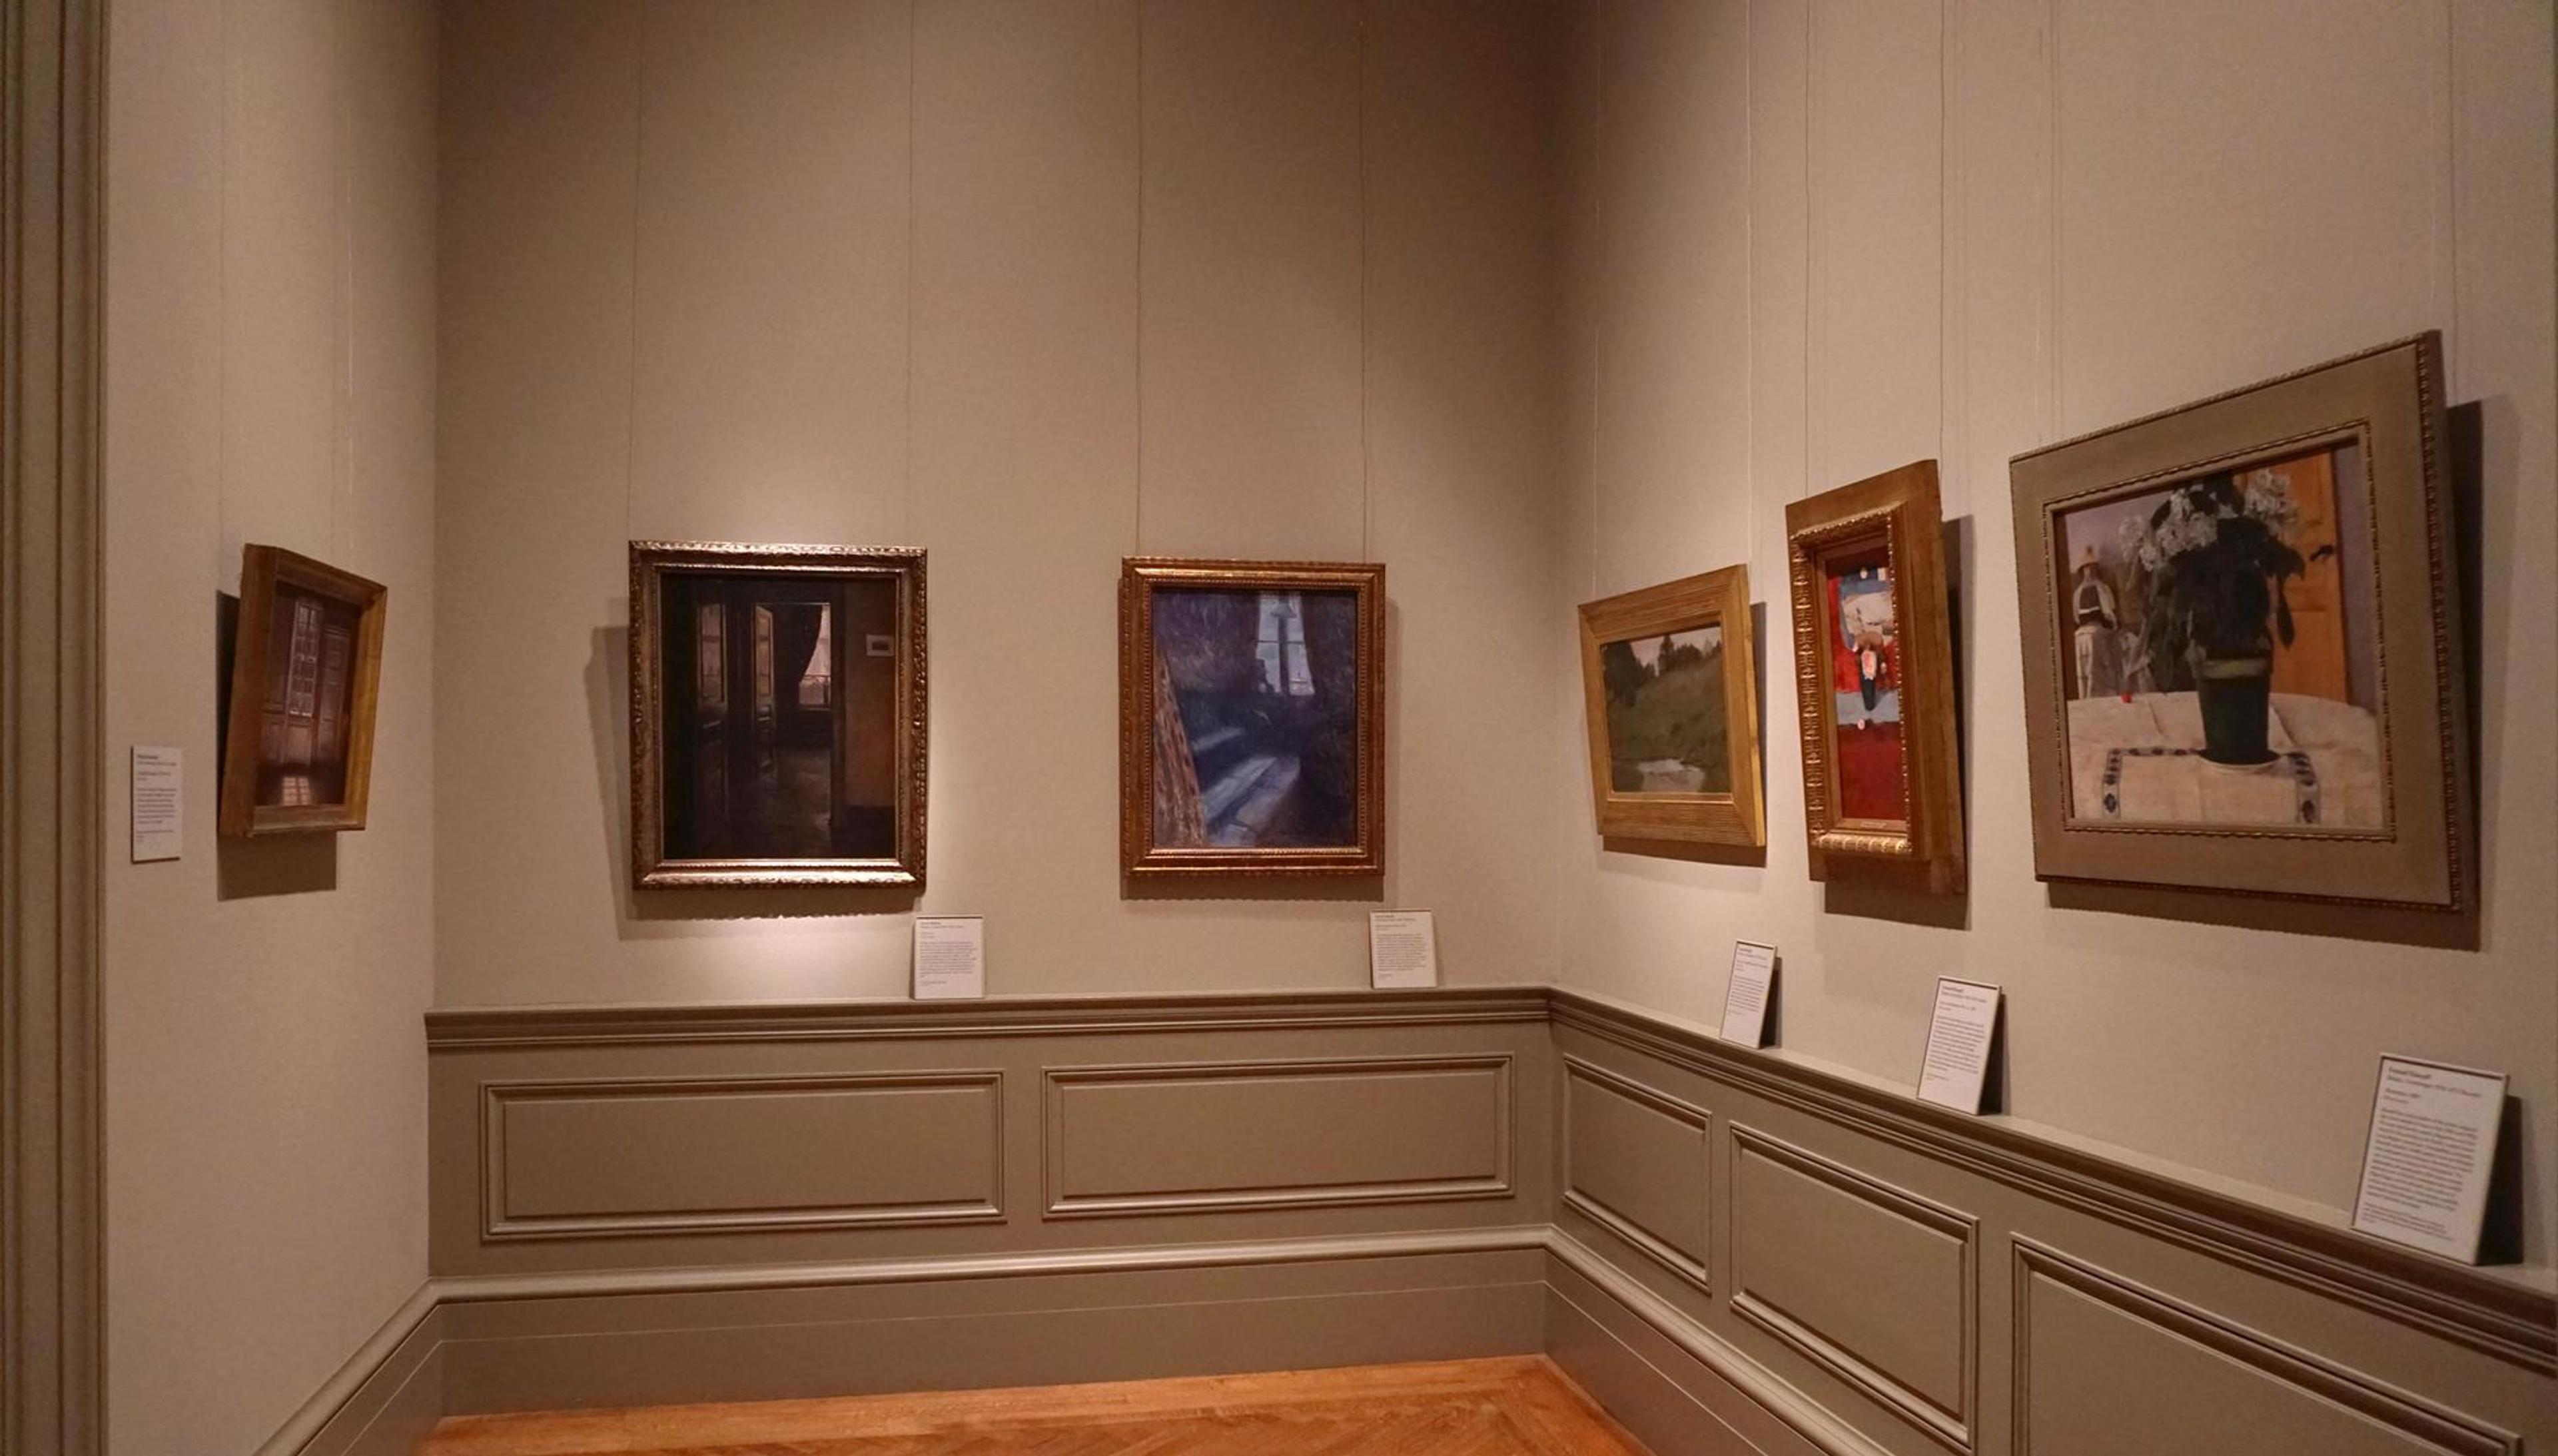 View of a gallery of paintings by northern European artists from the 19th century